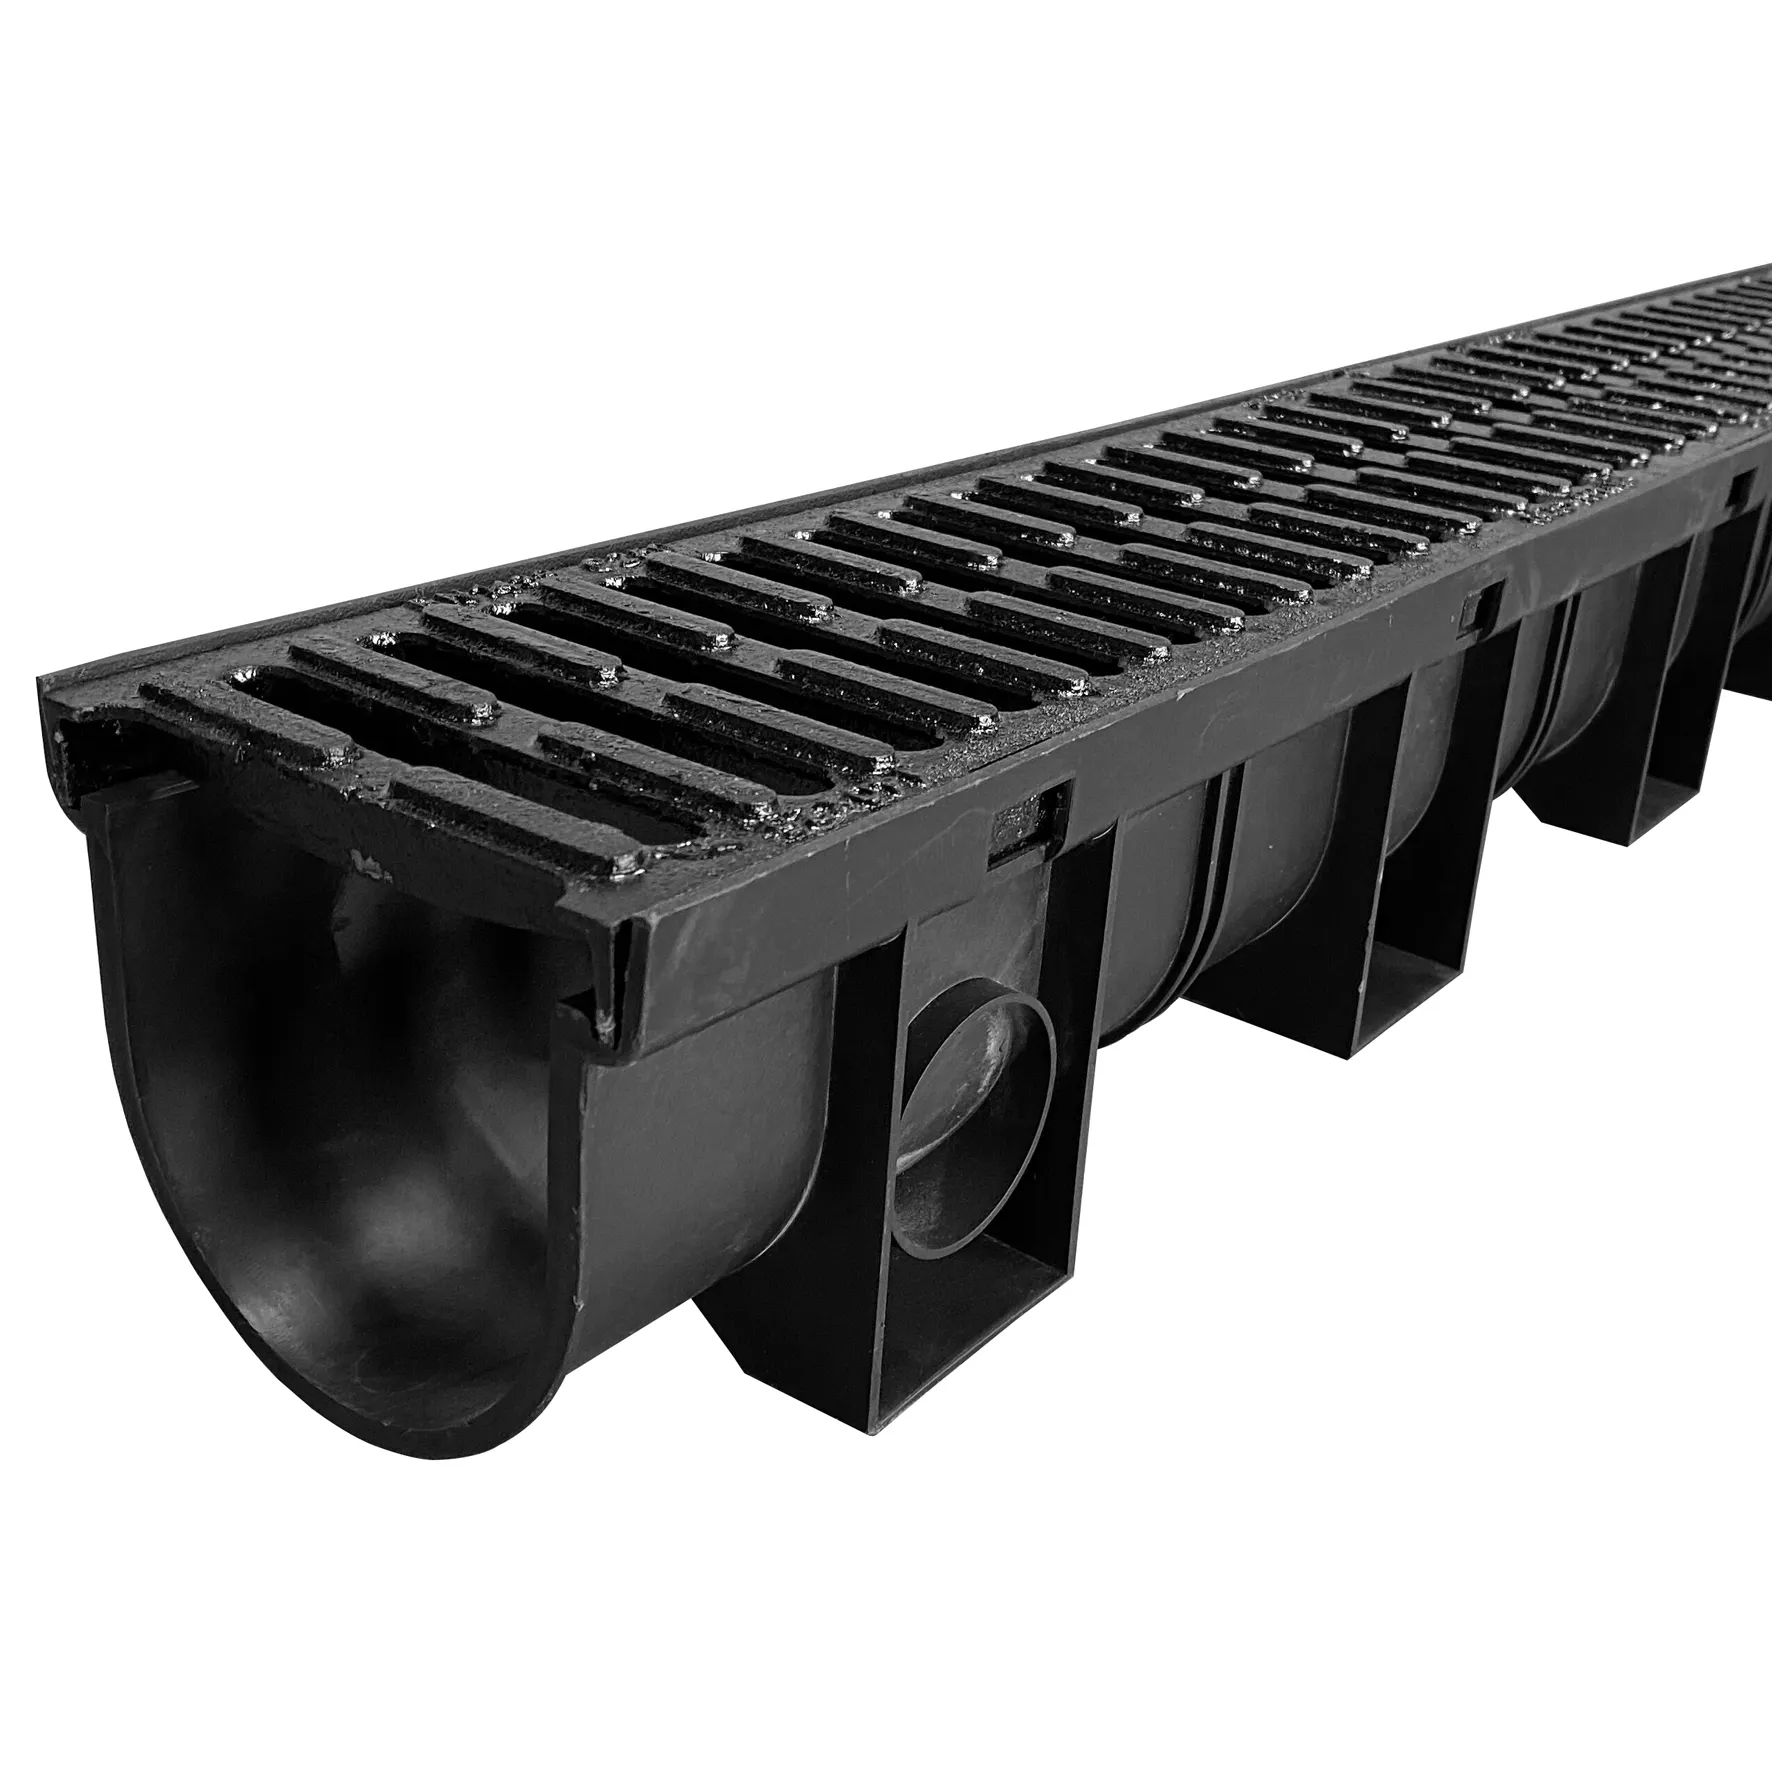 high quality drain grate drainage gutter rain water drainage systems with cover for outdoor